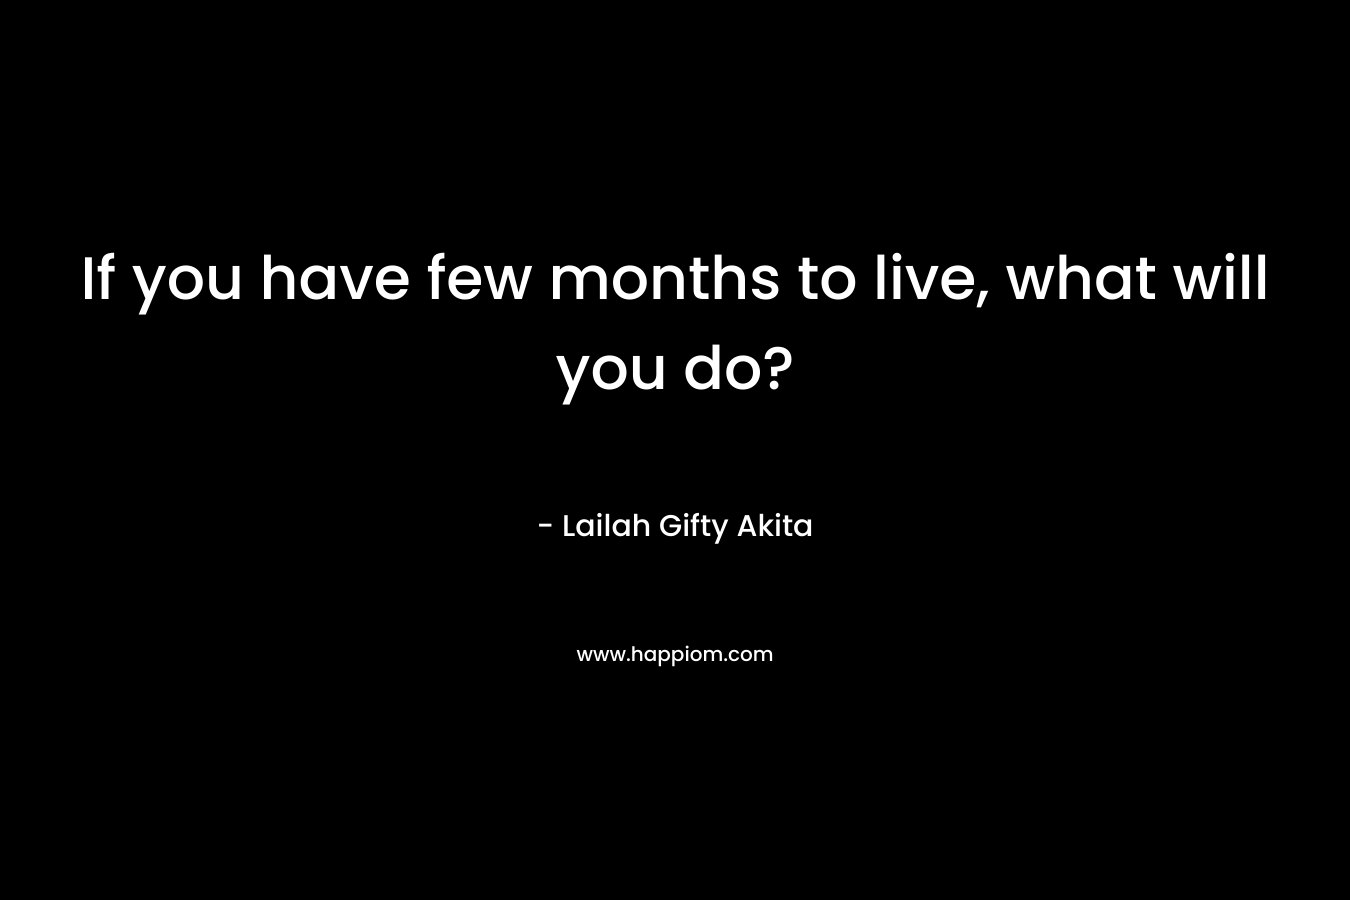 If you have few months to live, what will you do?